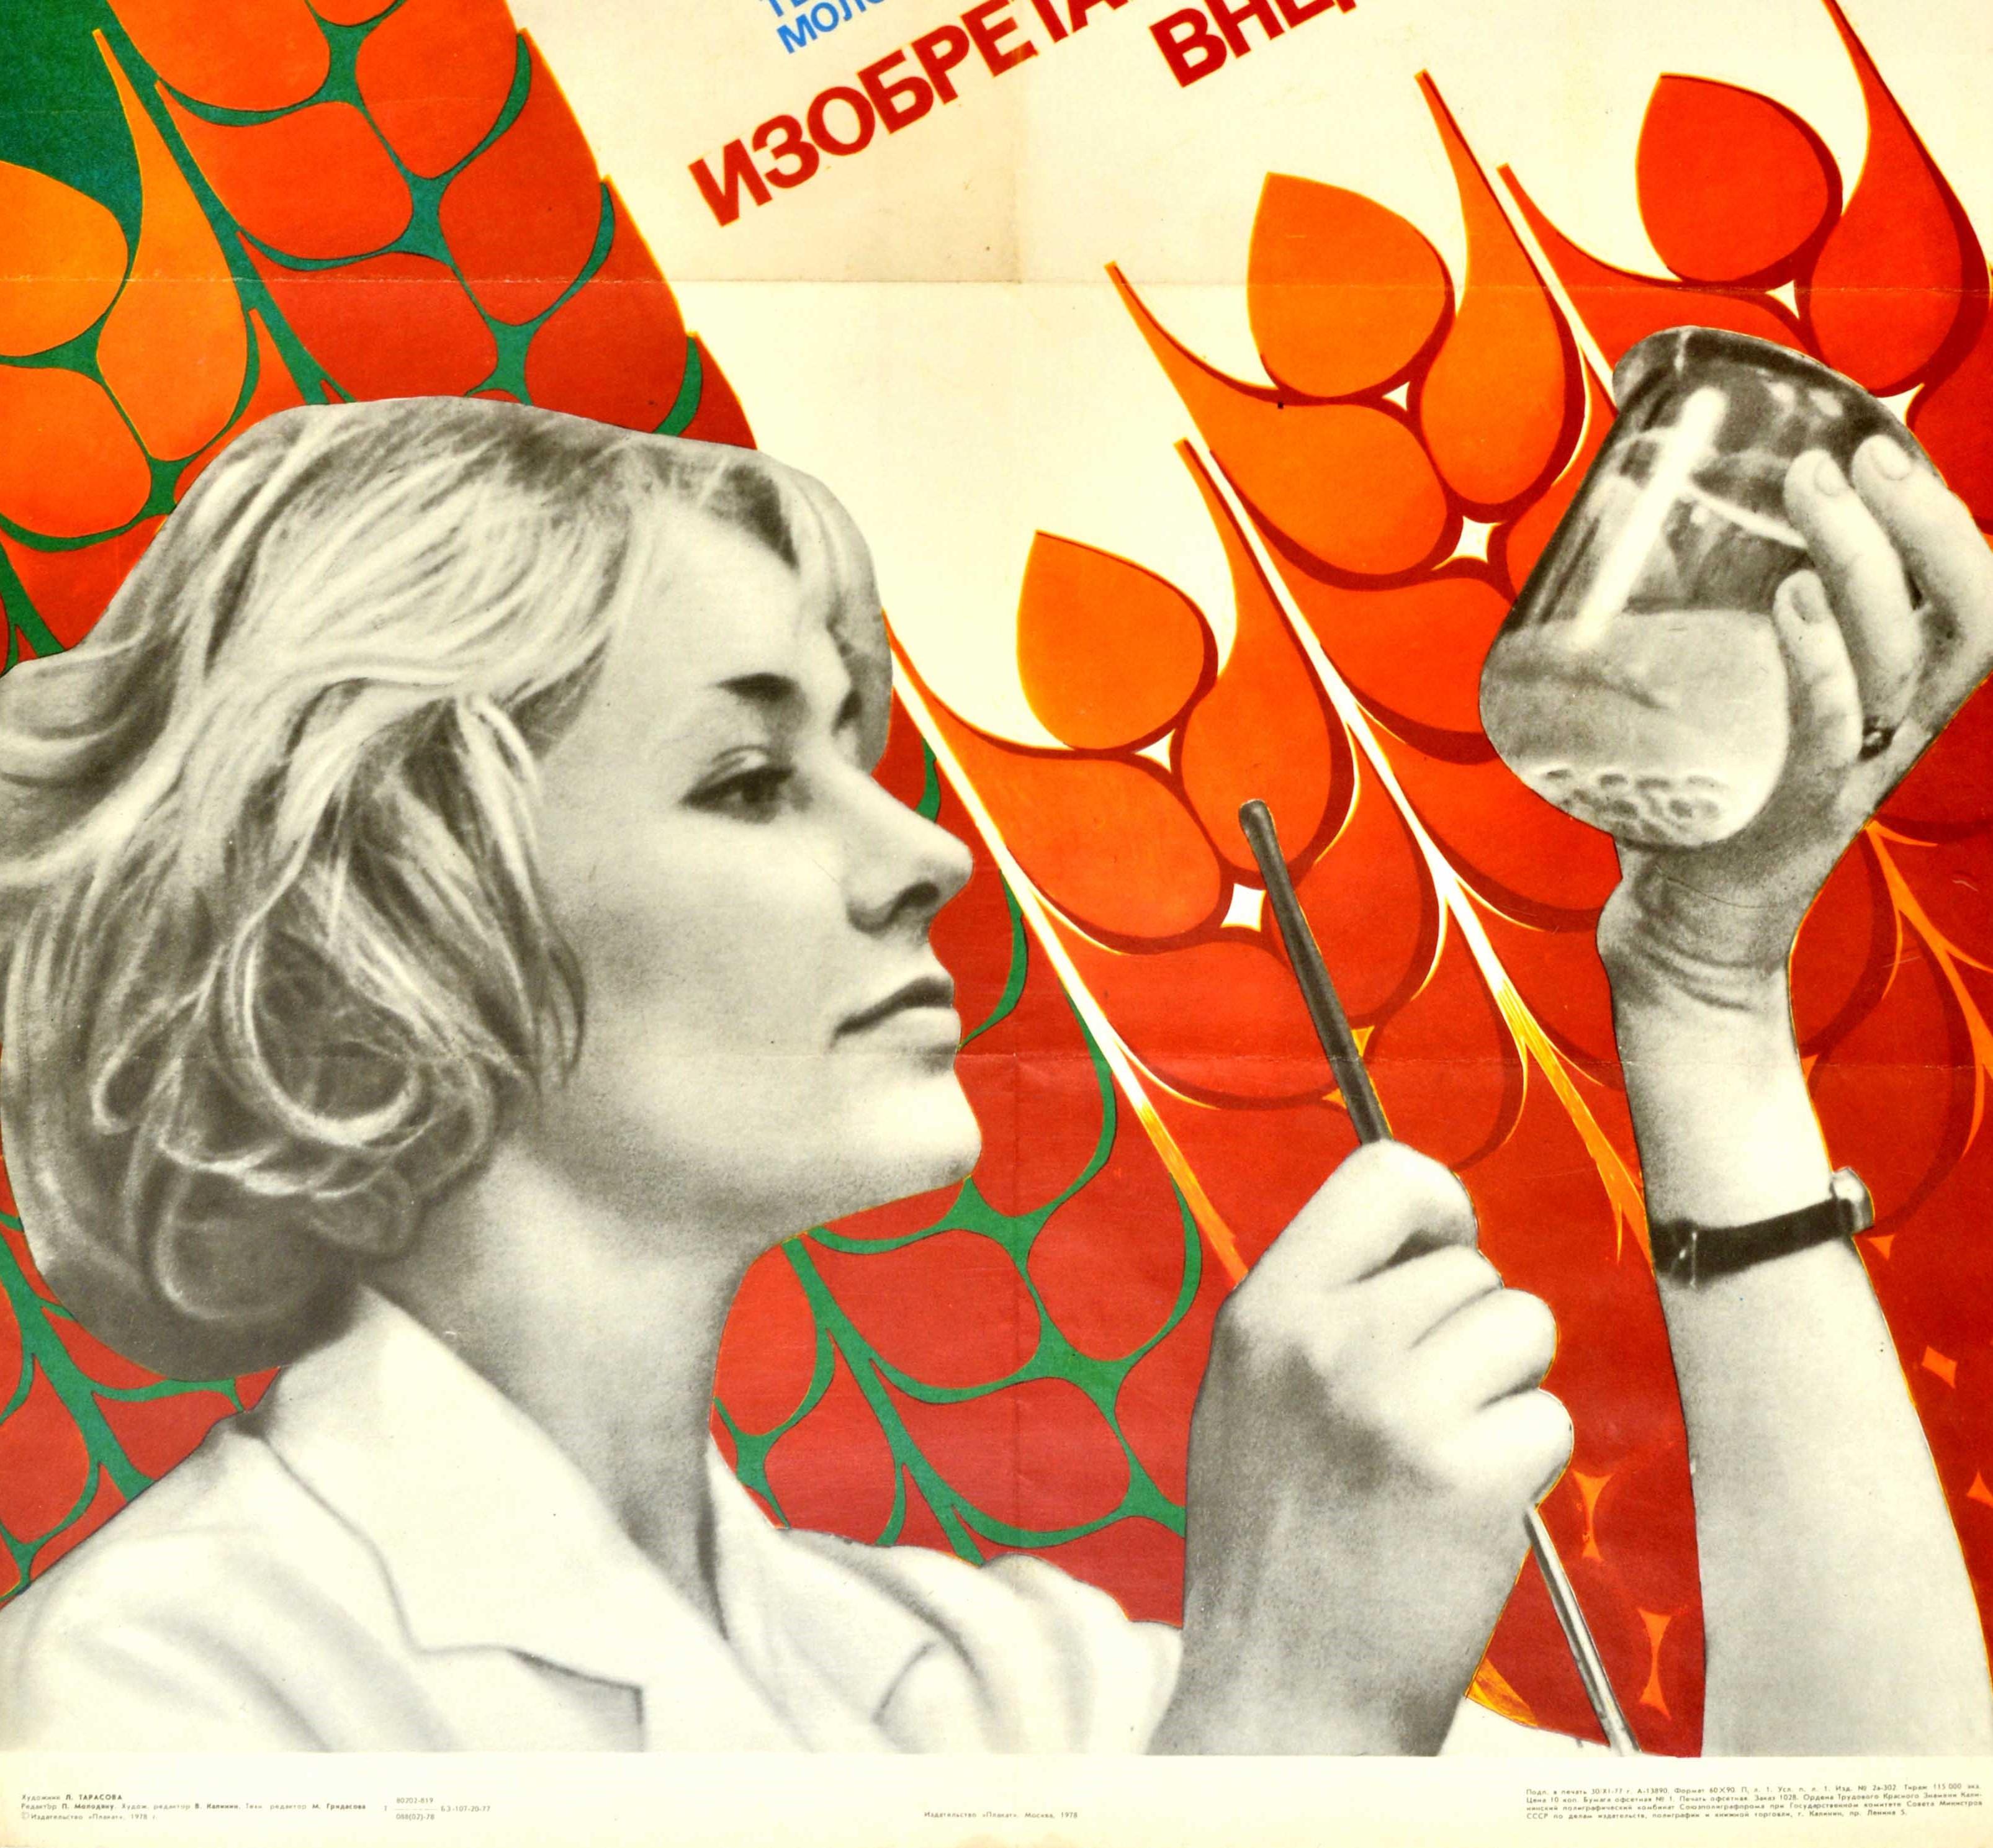 Original vintage Soviet motivational propaganda poster, Invent! Improve! Implement! showing a black and white photograph of a scientist inspecting the chemical contents of a beaker in front of a colorful background featuring a wheat and field design